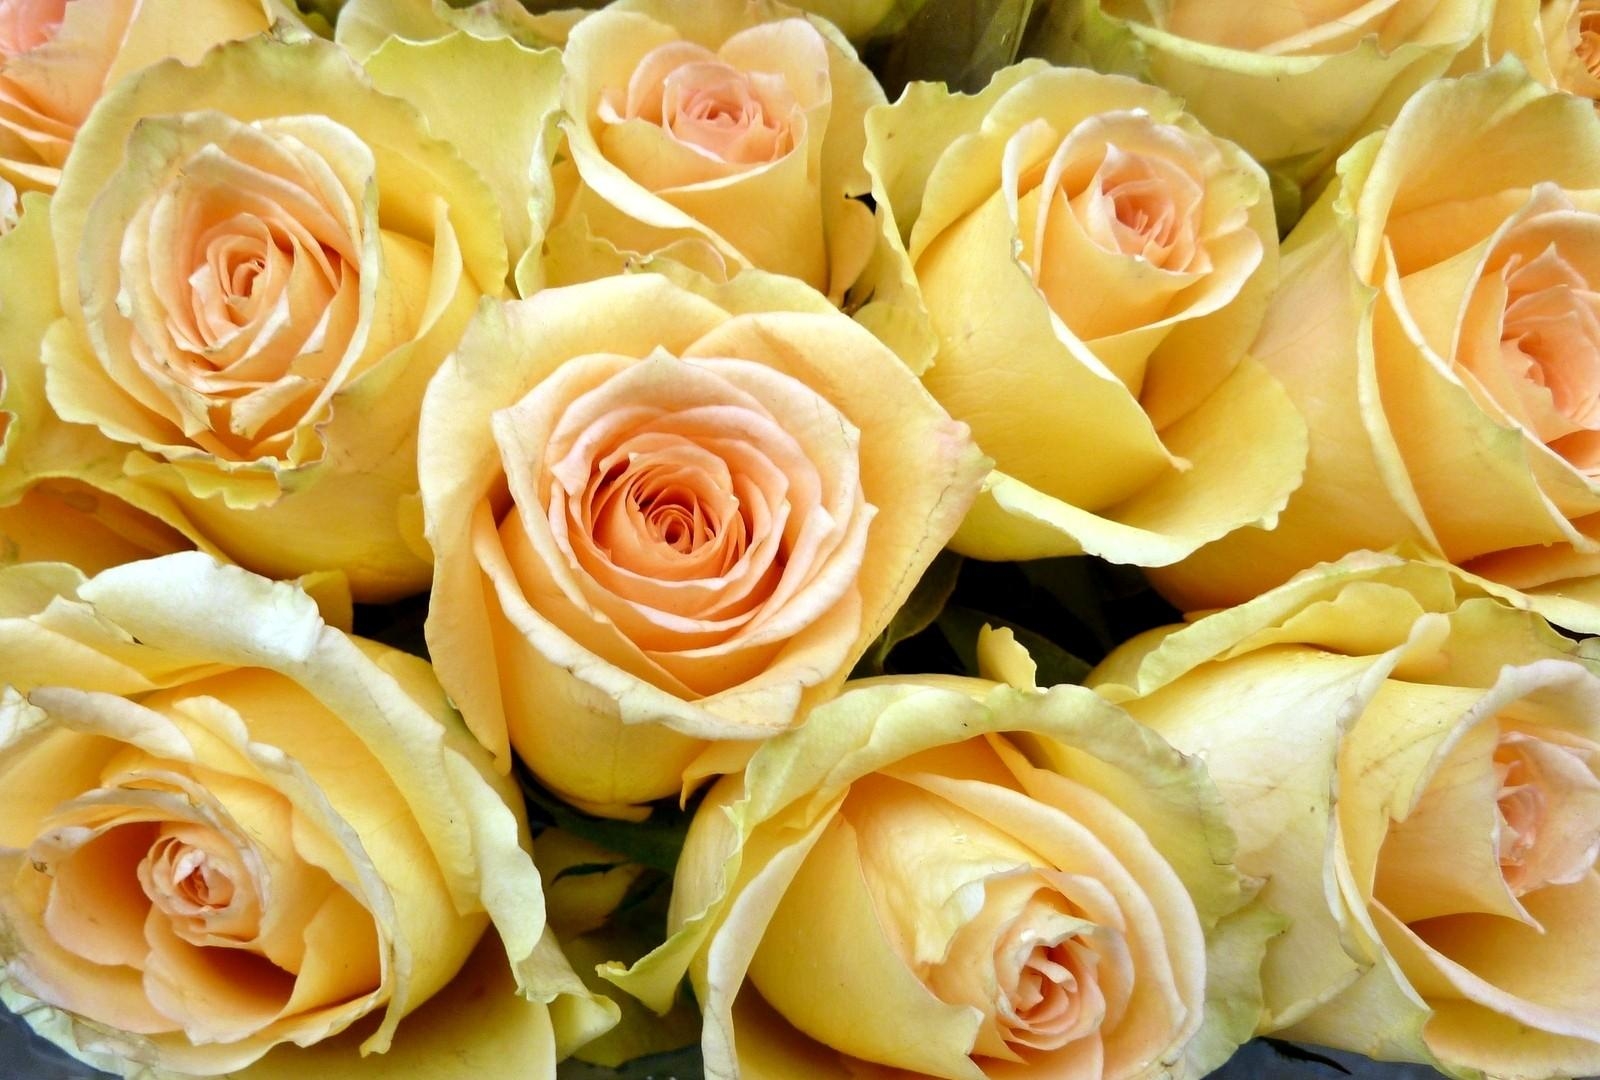 flowers, roses, yellow, buds, lot 8K